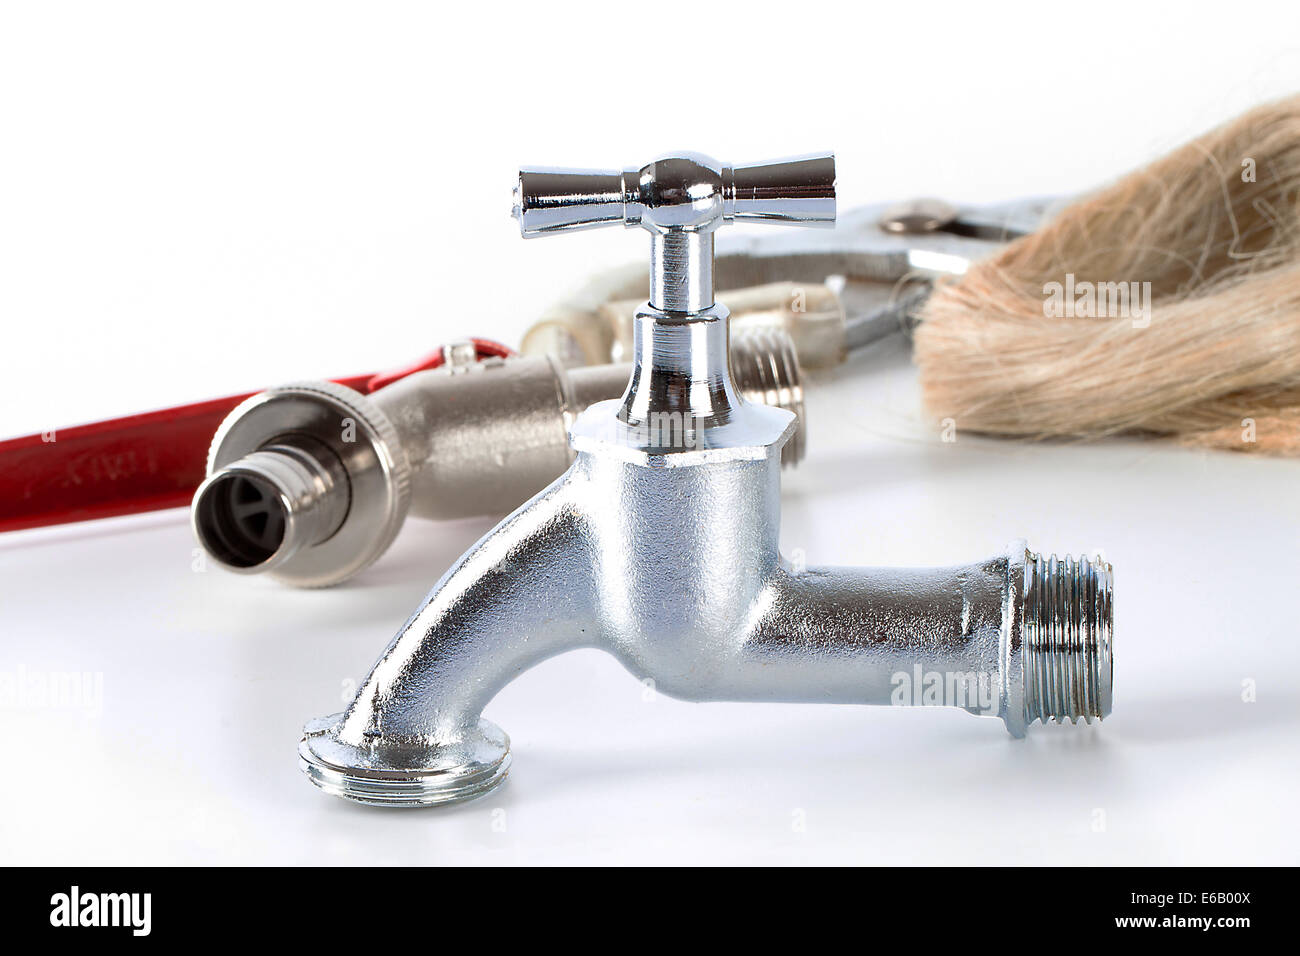 Faucet Water Supply Spare Parts Stock Photo 72770906 Alamy